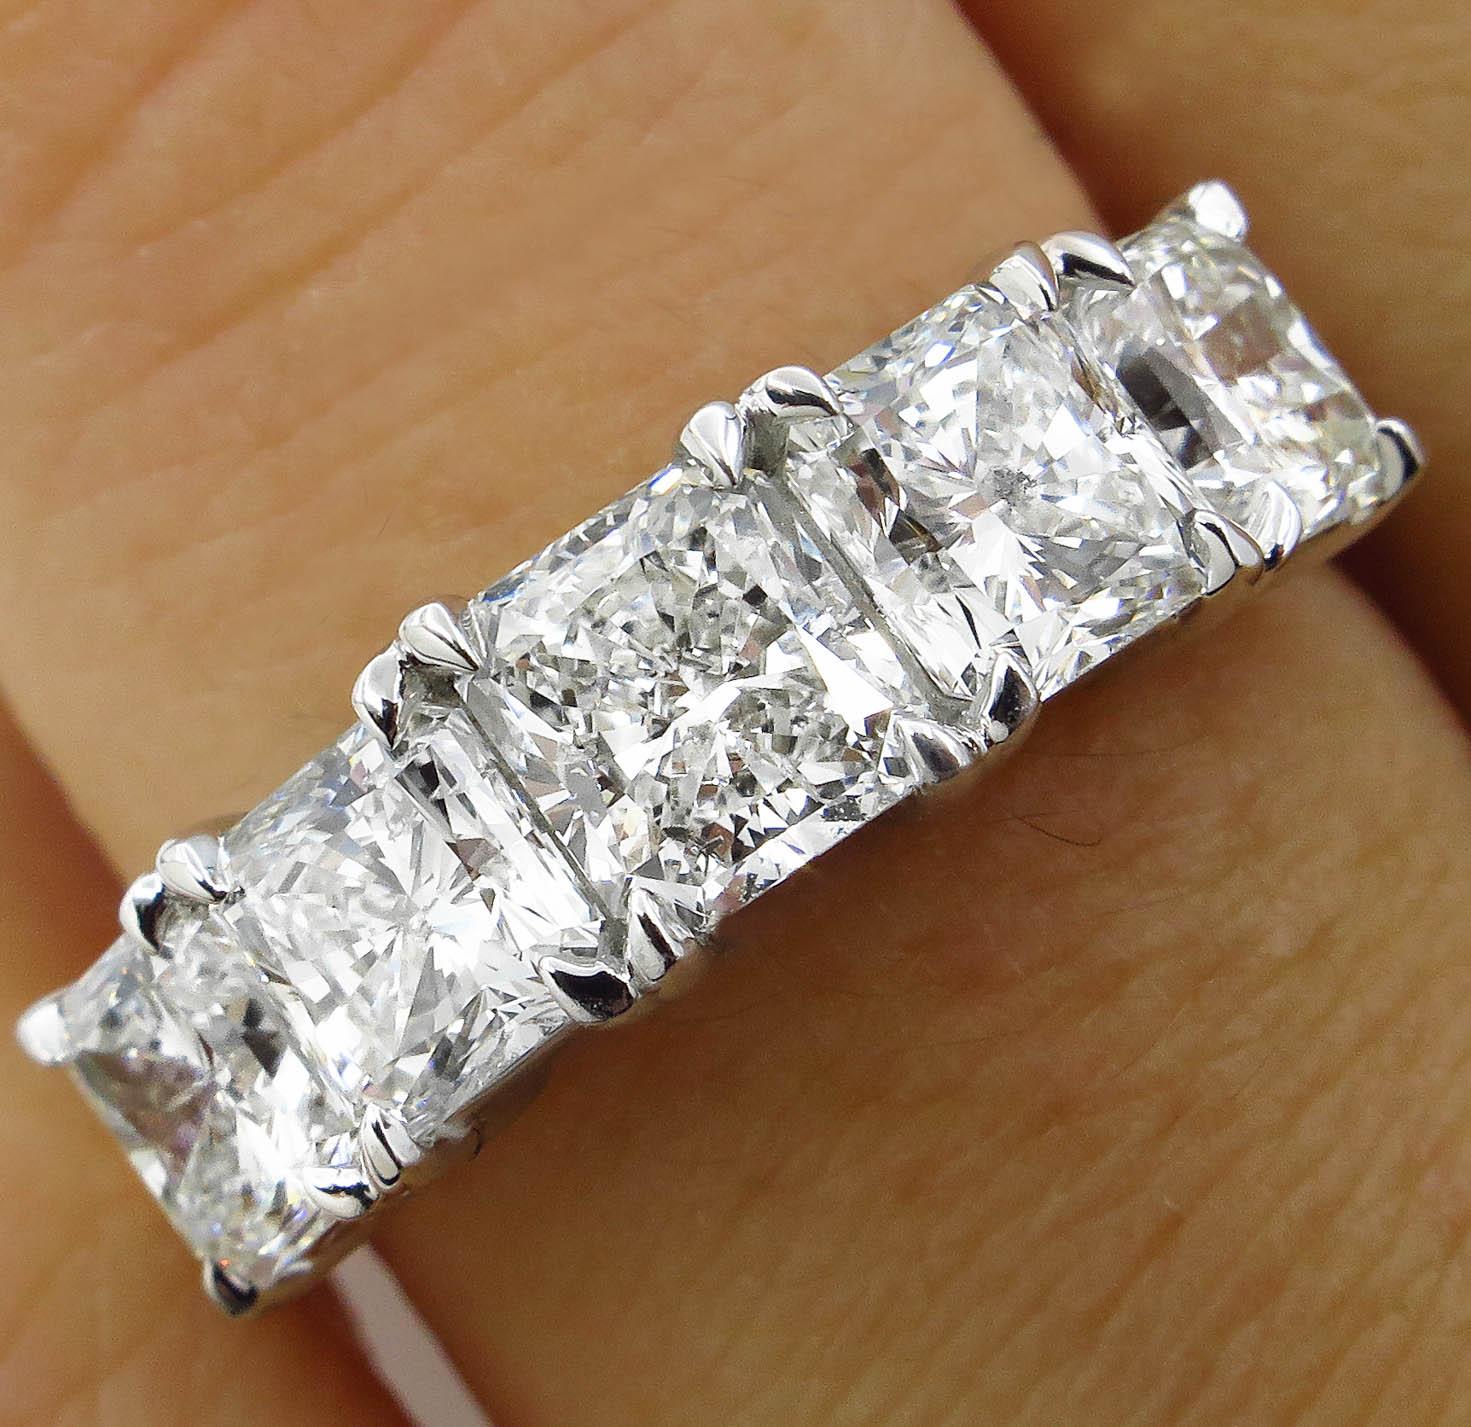 A Breathtaking Vintage HANDMADE Platinum (stamped) Diamond 5 Stone Engagement Wedding band ring. The Prong Set Radiant Cut Diamond is 0.75CT; GIA Certified in J color I1 clarity; with measurements of 5.29x4.86x3.34mm. GIA report # 6193782878.
It is